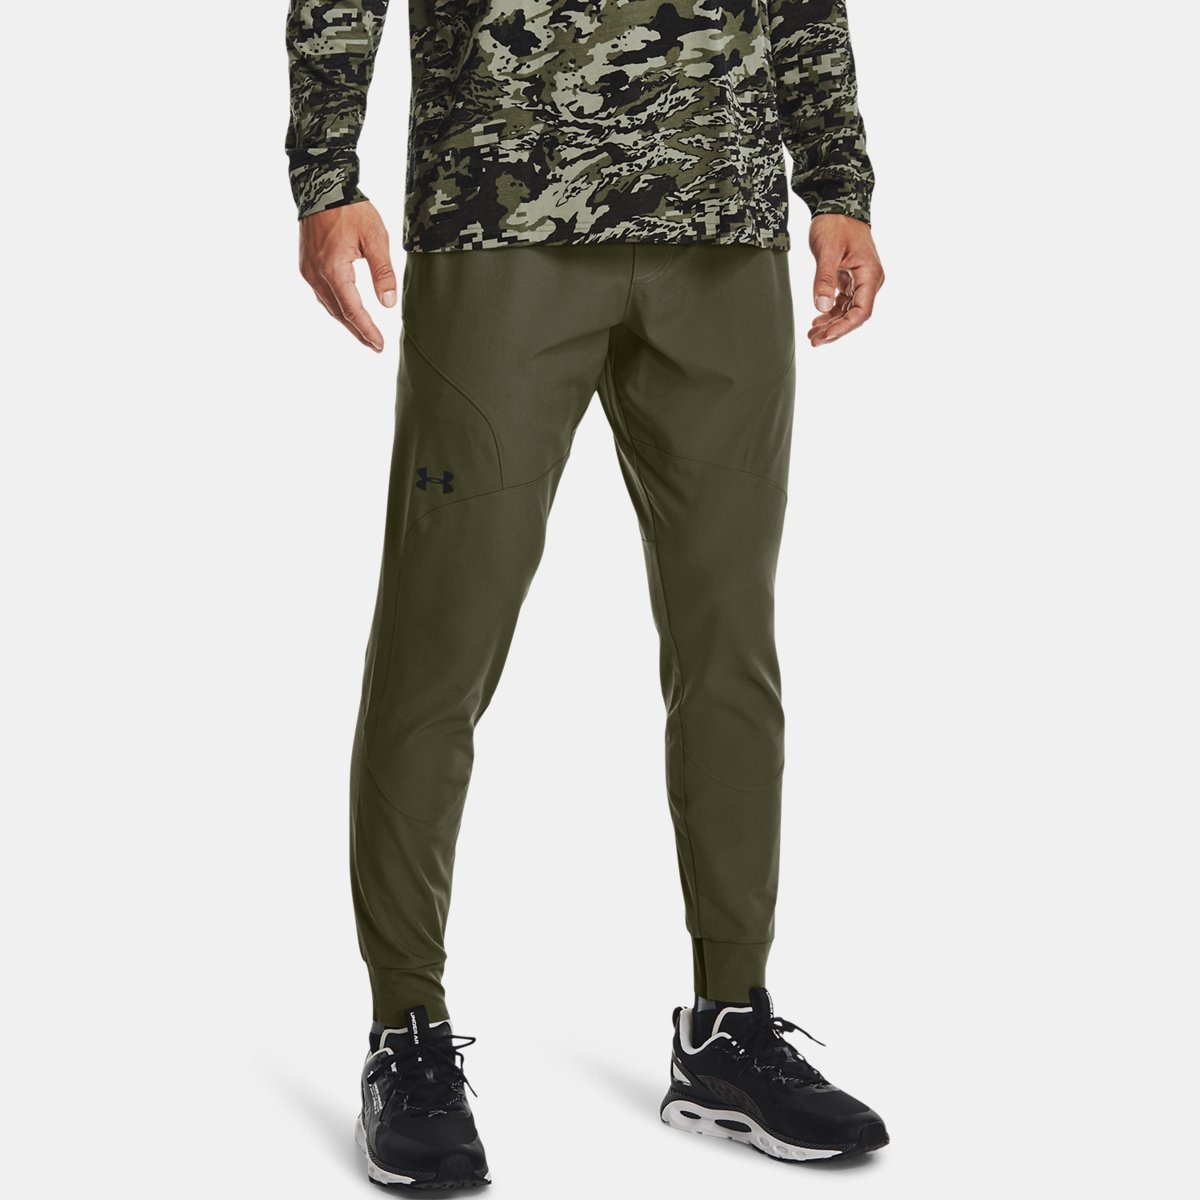 Gents Green Joggers at Under Armour GOOFASH